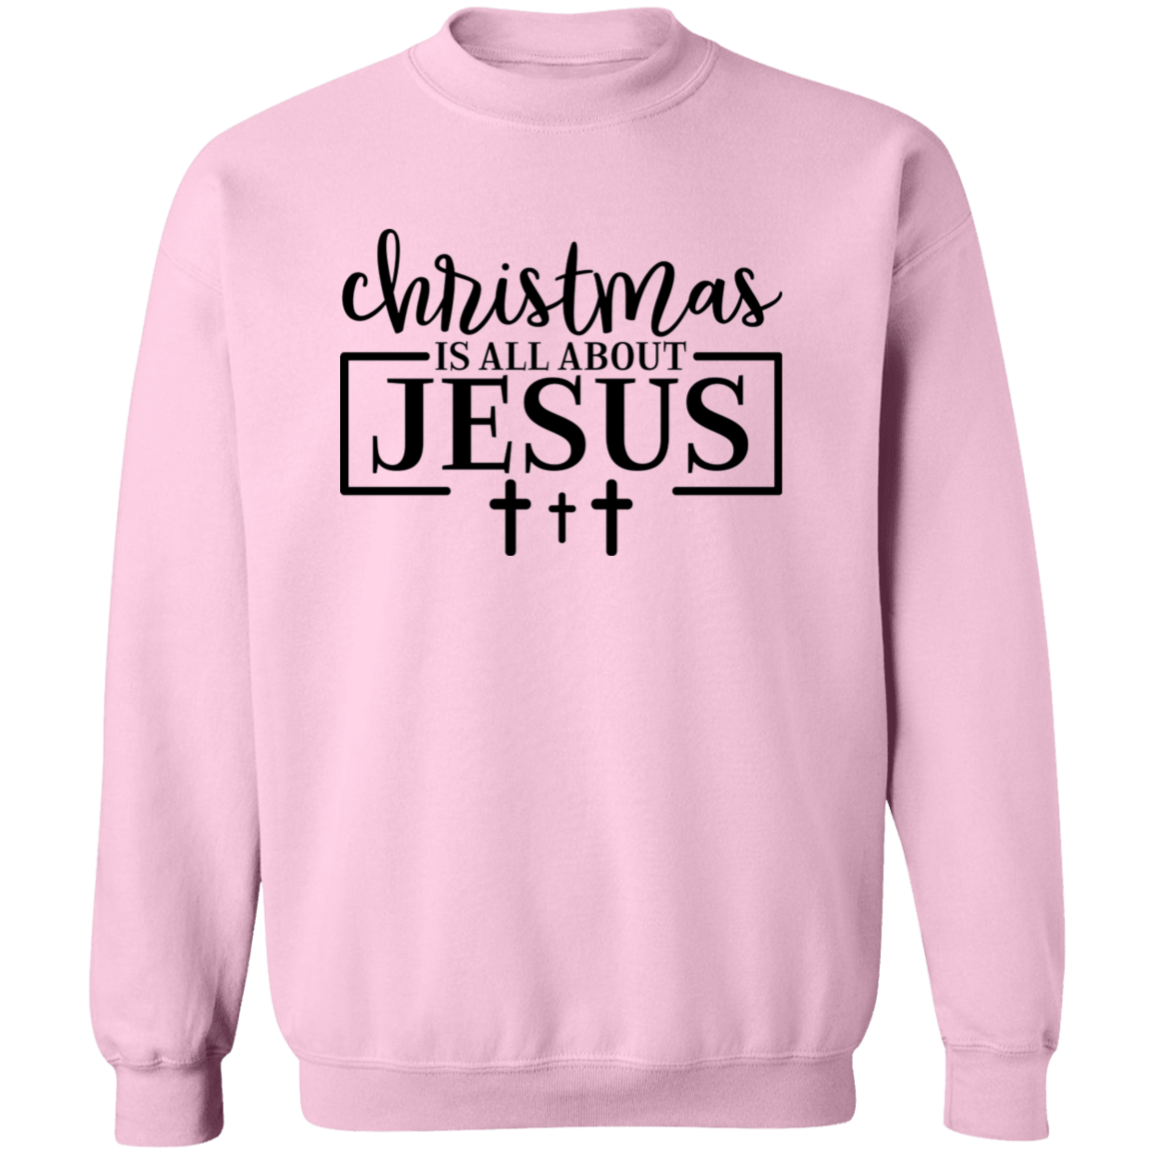 CHRISTMAS IS ALL ABOUT JESUS SWEATSHIRT, Christian Christmas sweater, Jesus sweatshirt